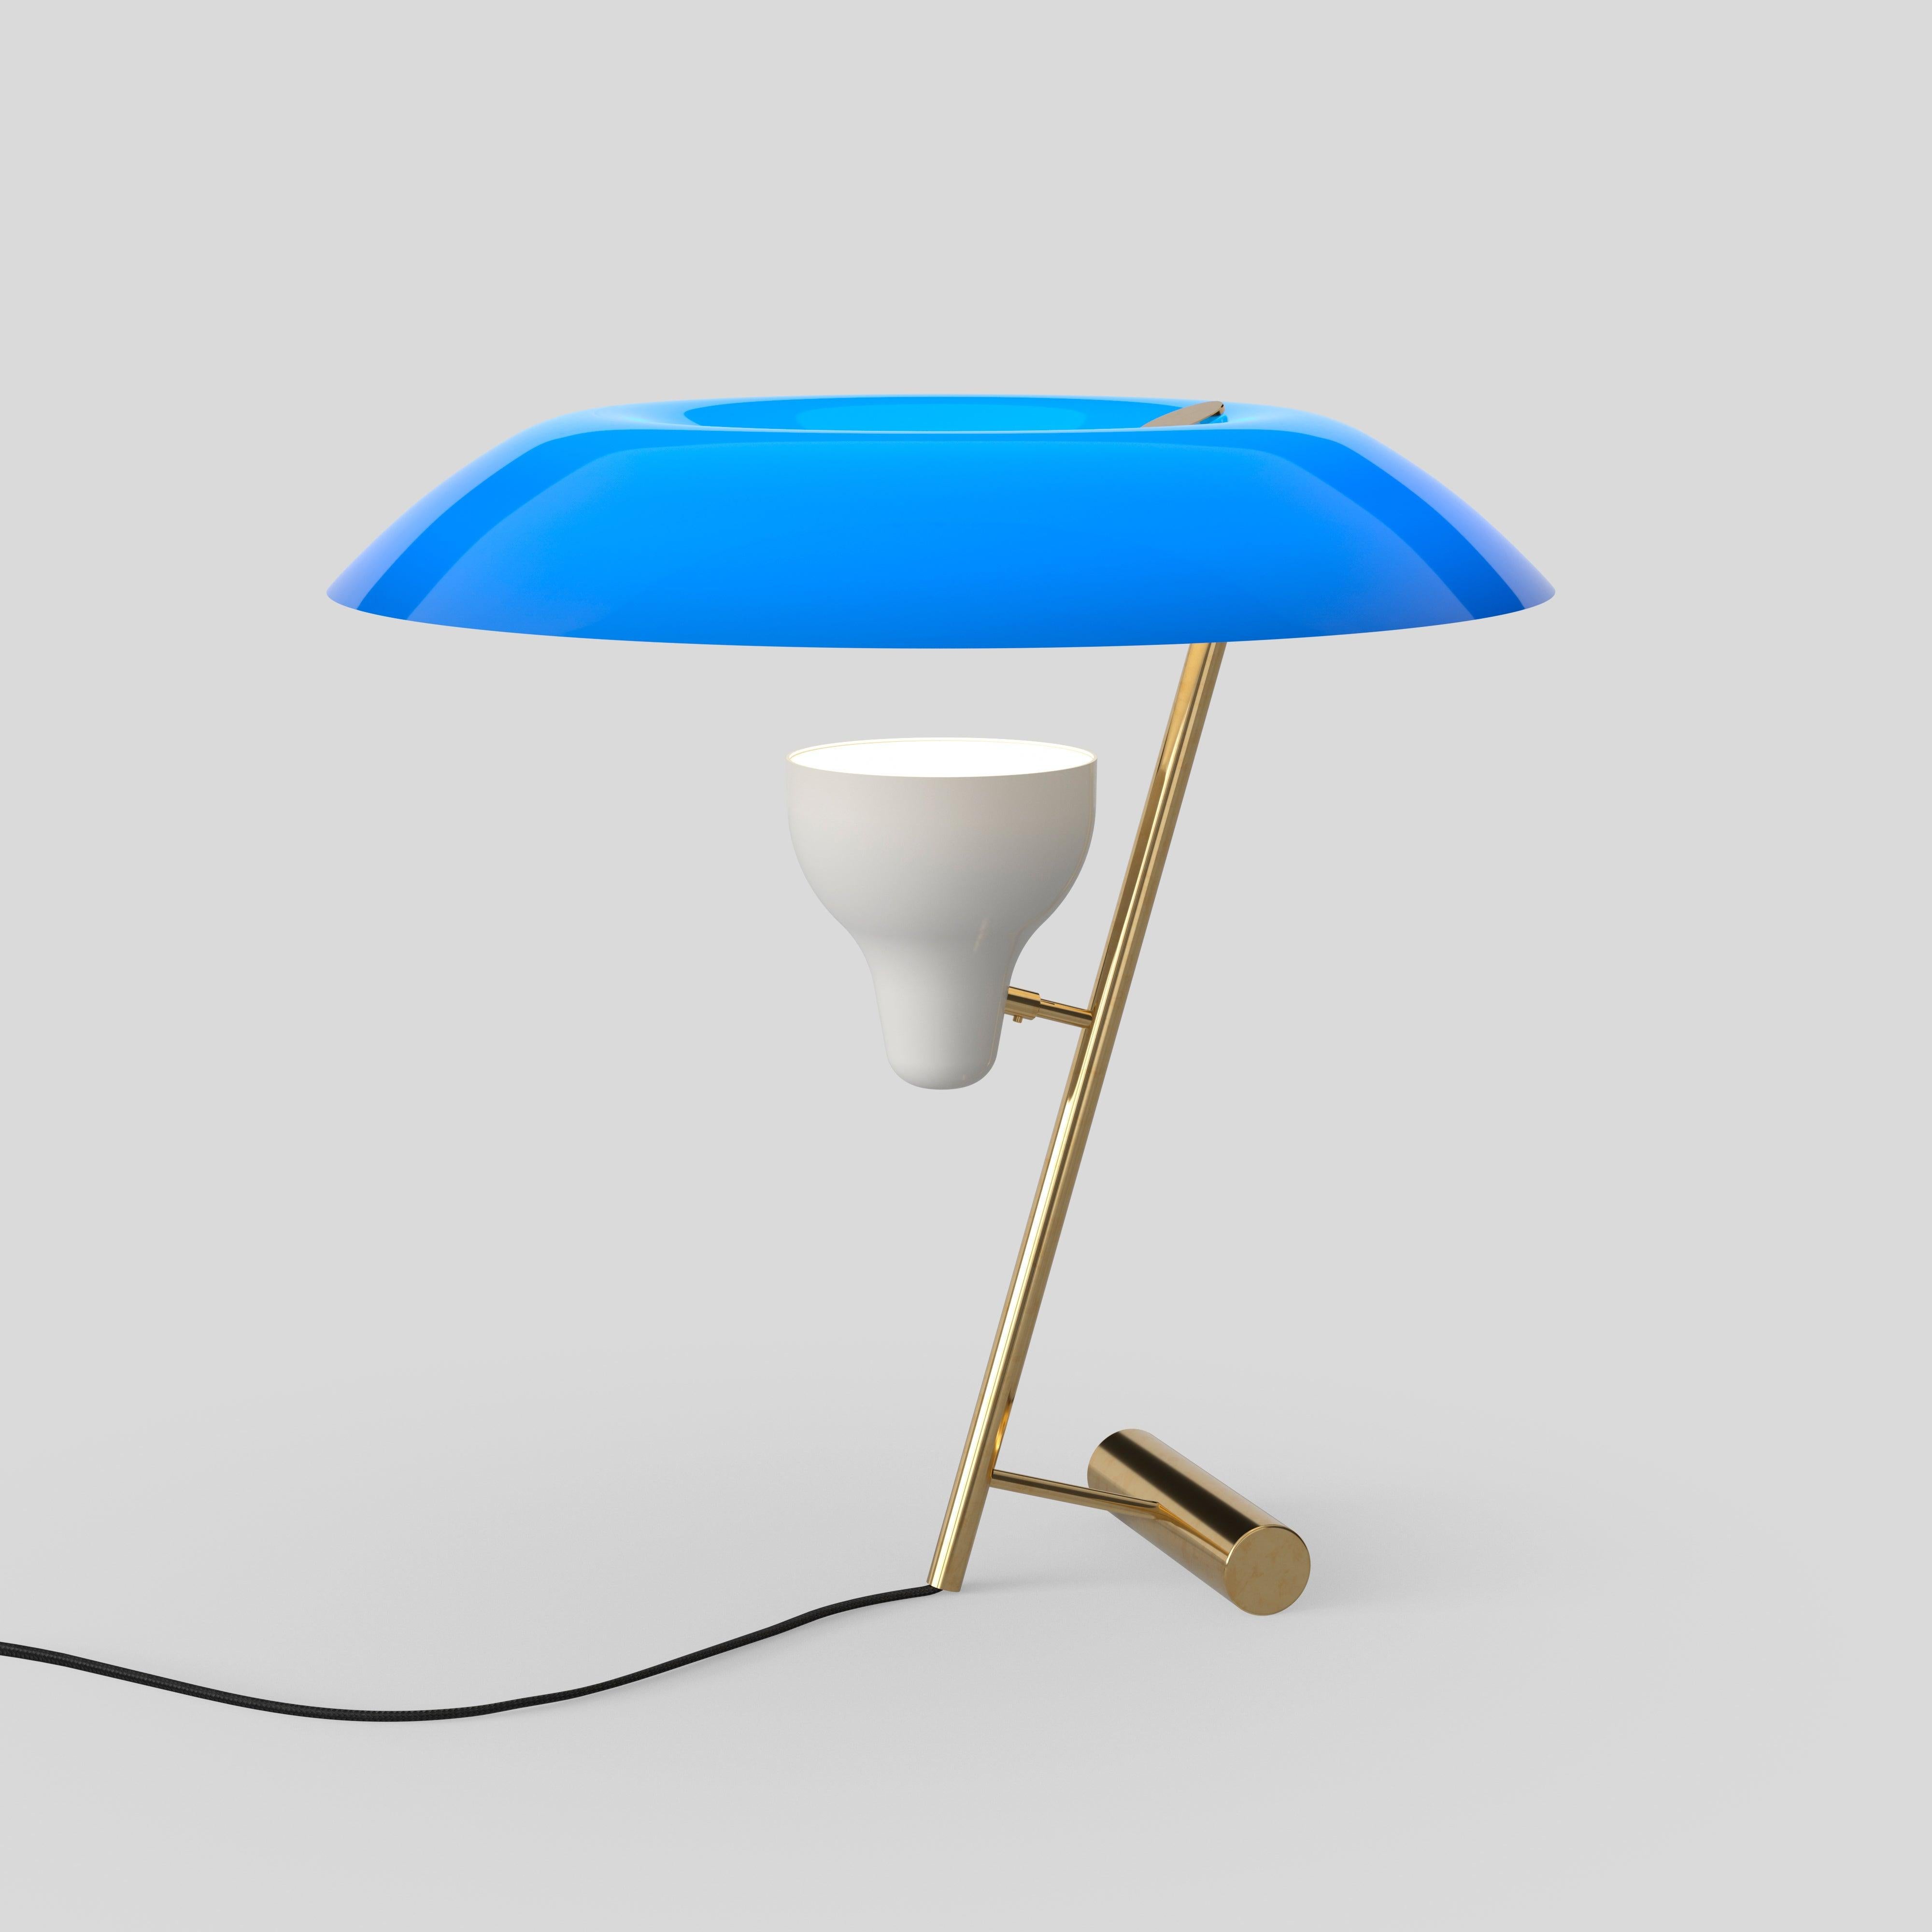 Gino Sarfatti Lamp Model 548 Polished Brass with Blue Difuser by Astep 4